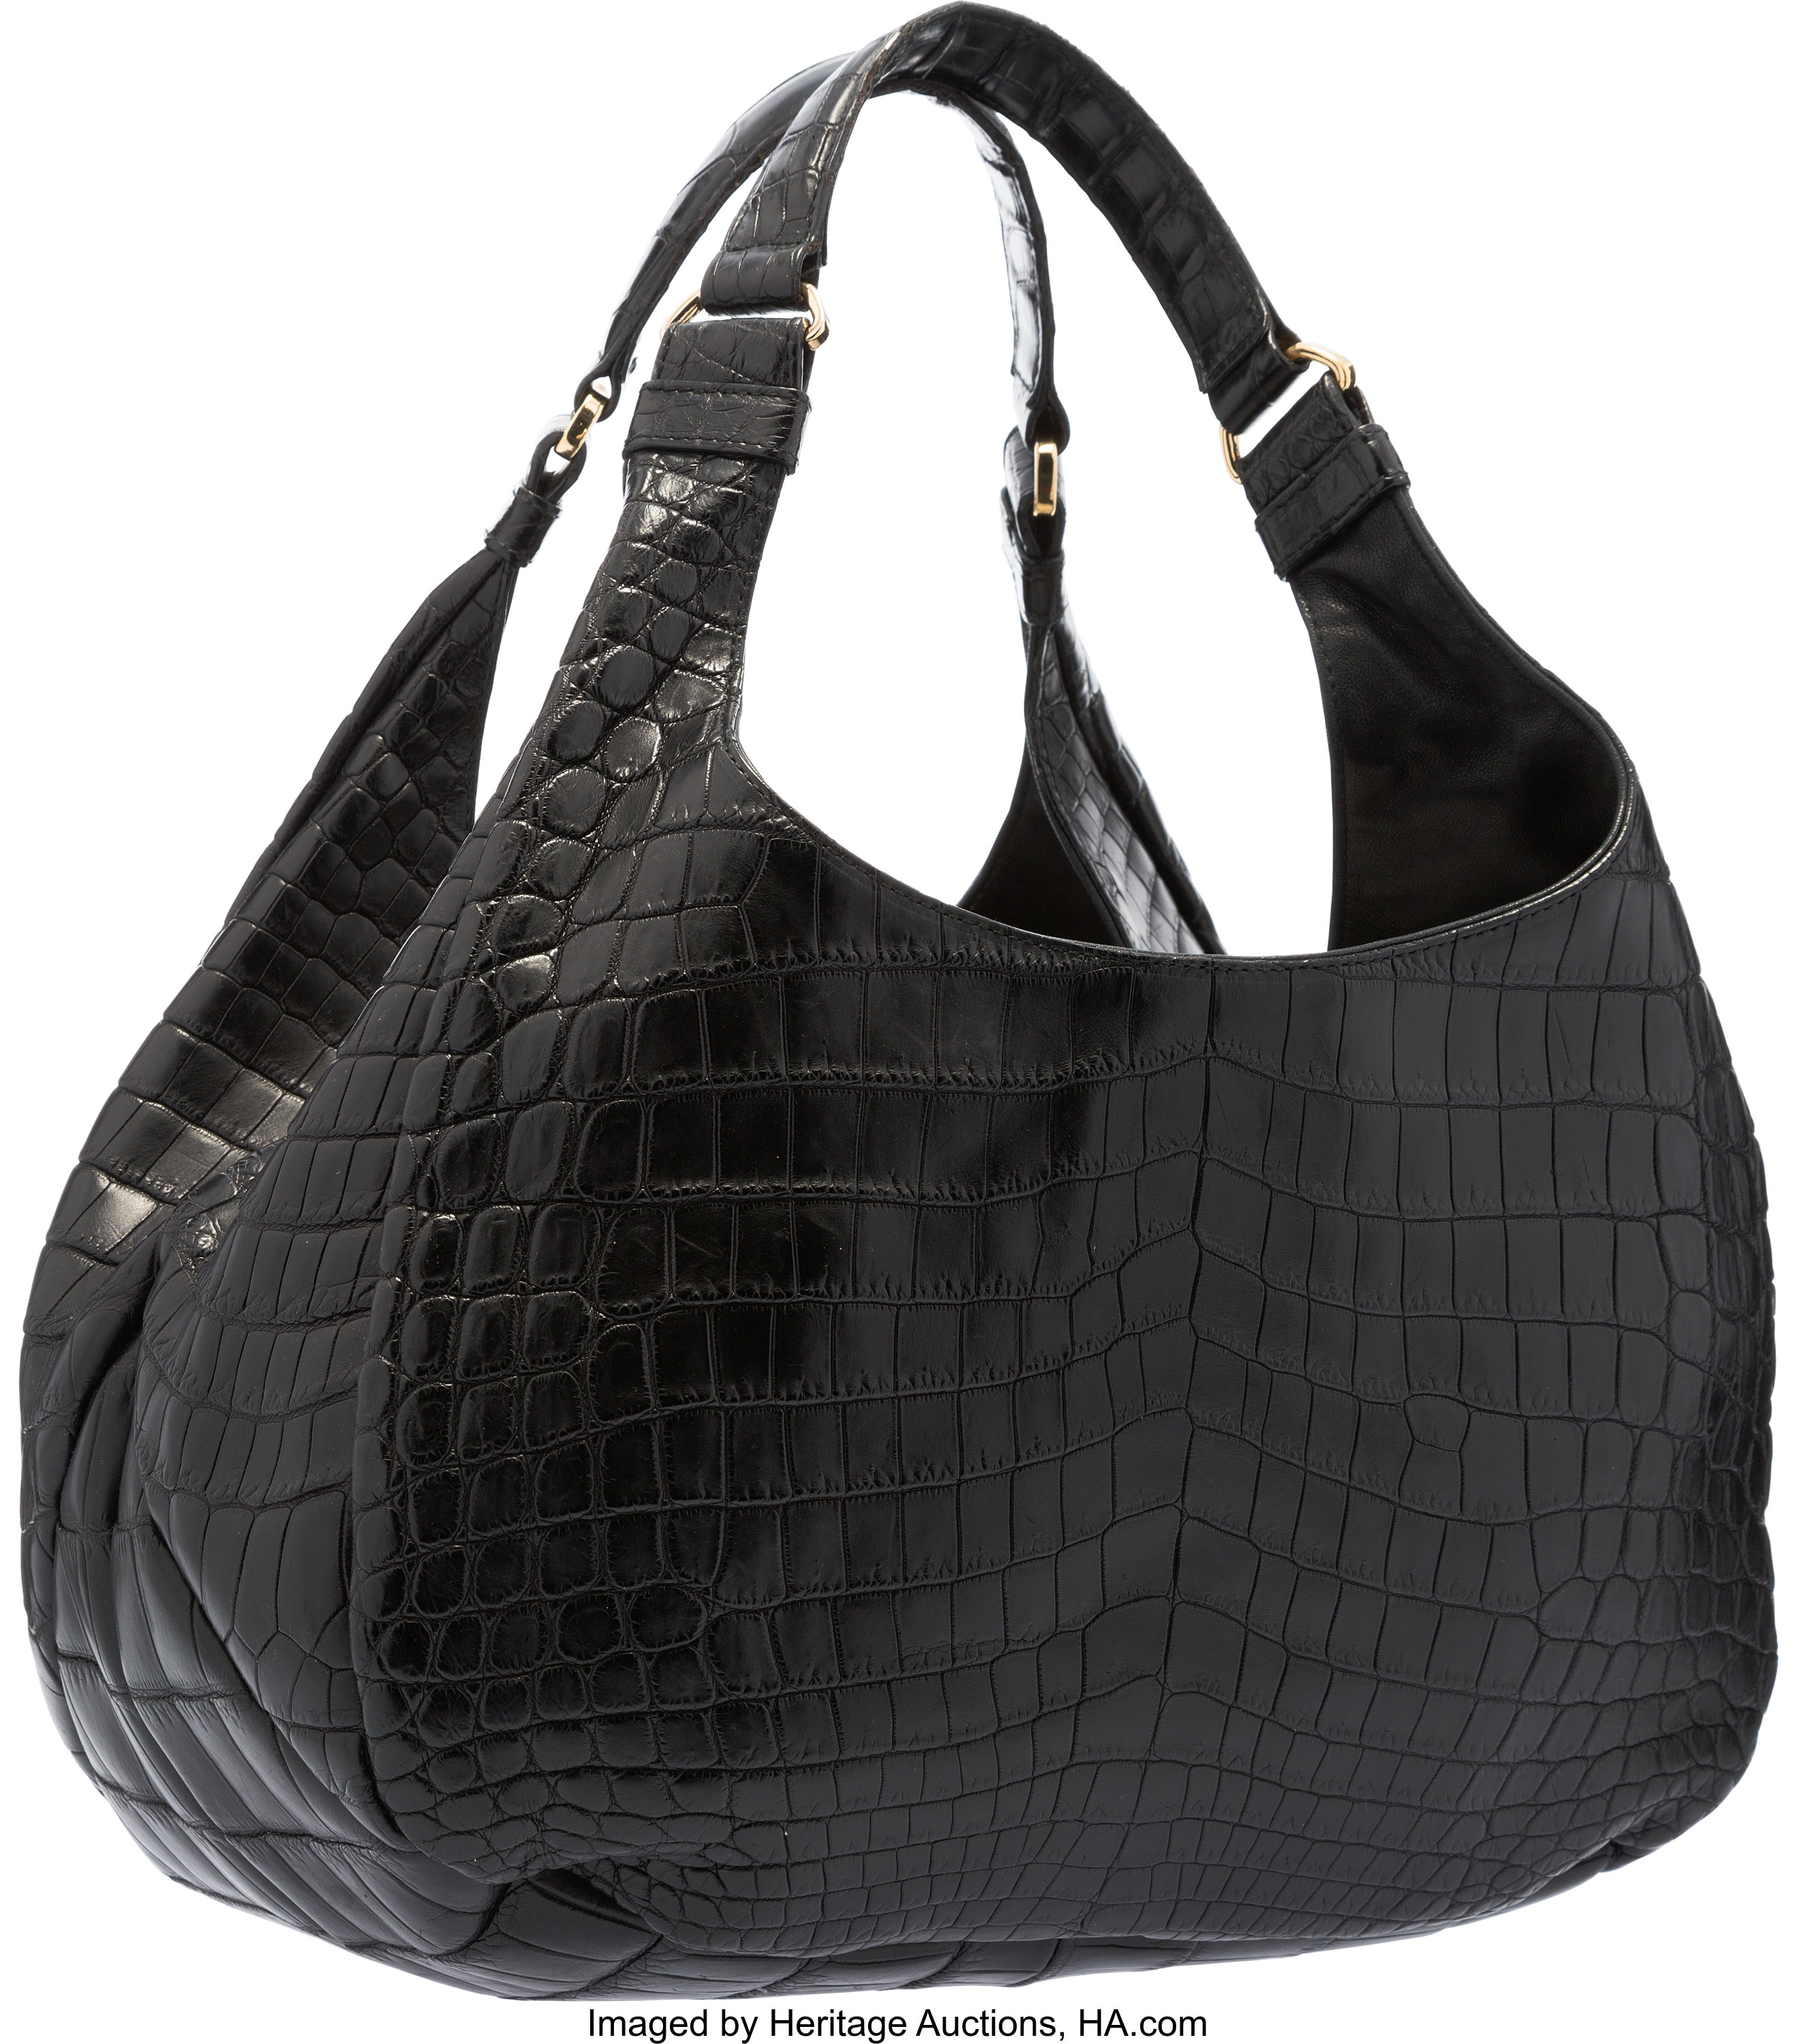 Bottega Veneta Bags And Accessories For Sale Value Guide Heritage Auctions